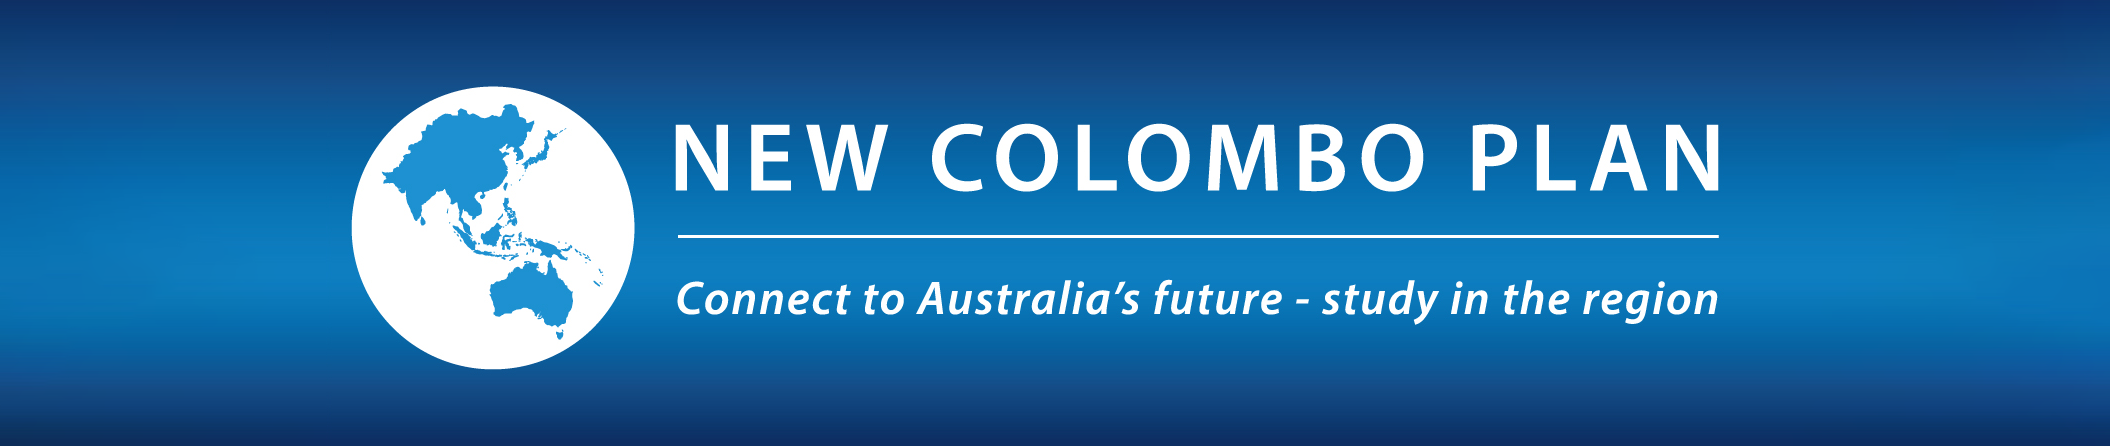 New Colombo Plan - Connect to Australia's future - study in the region